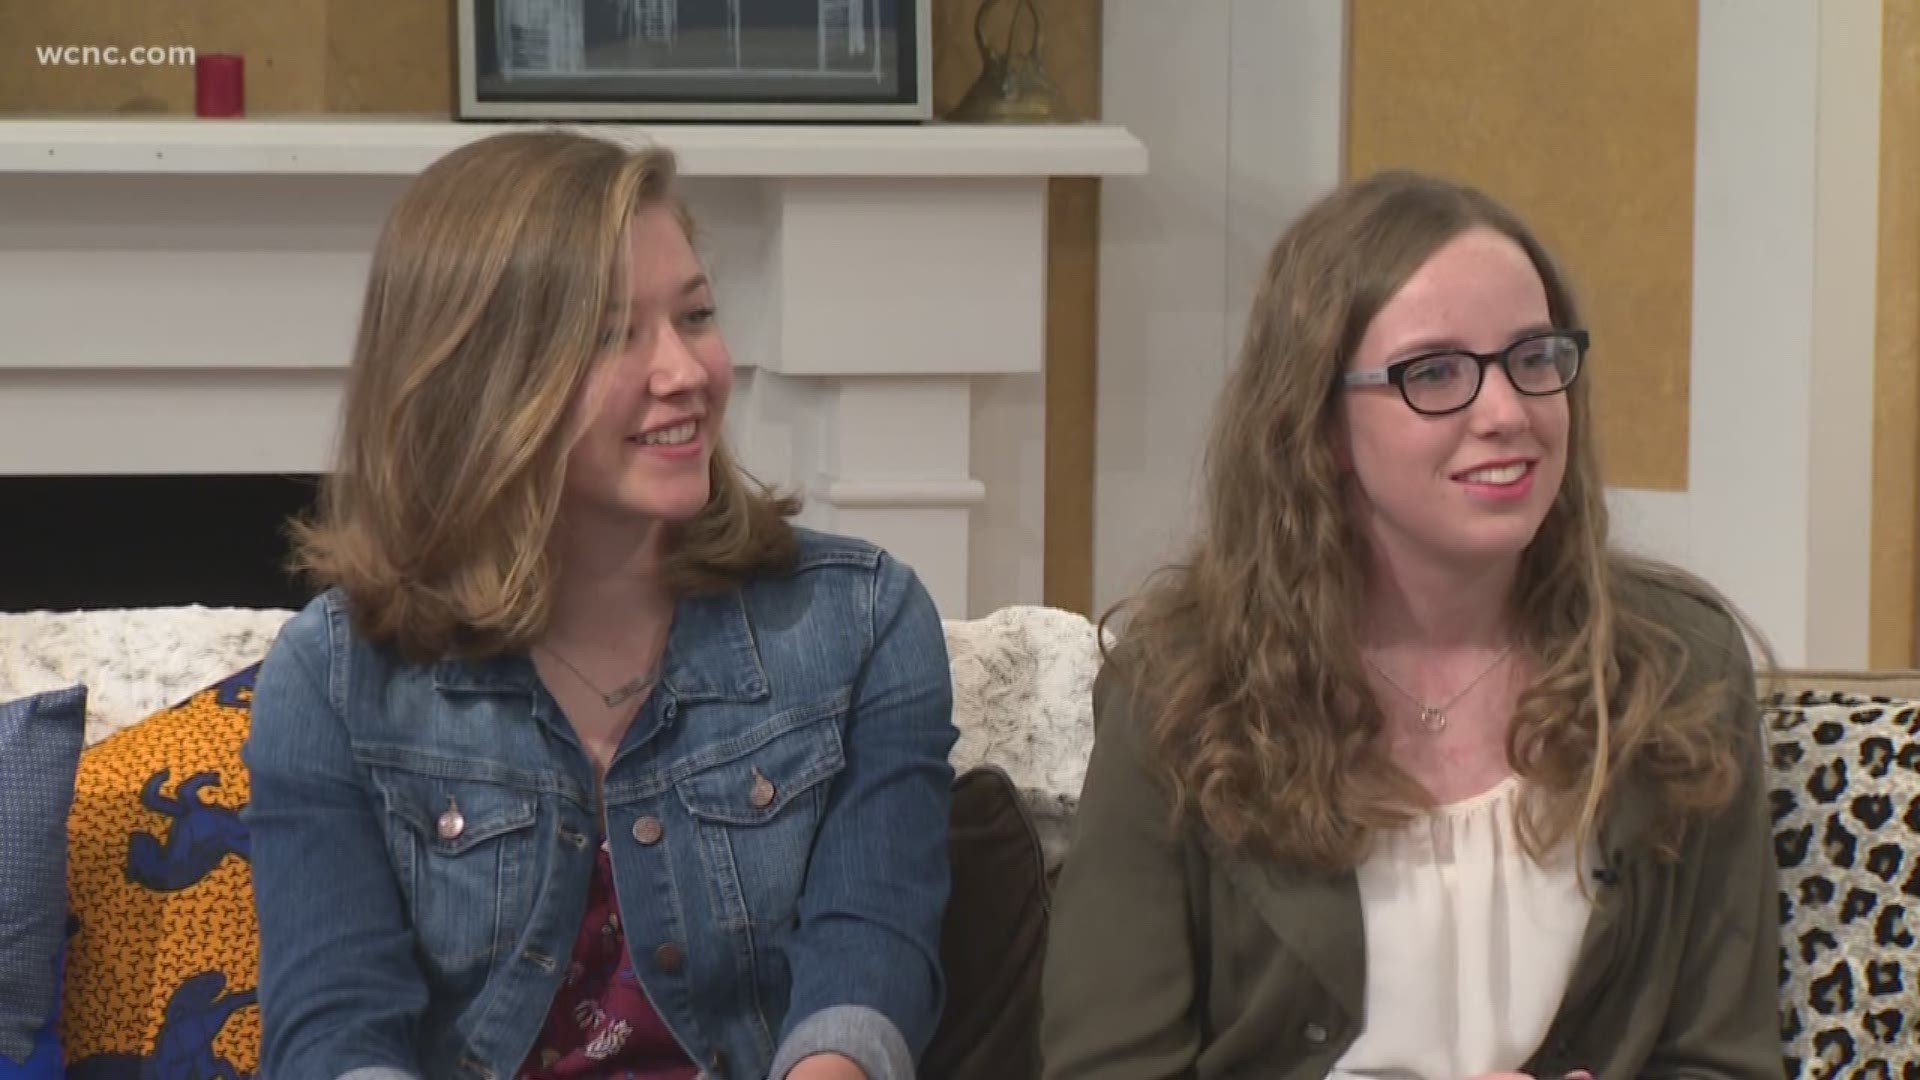 Lauren McCarthy and Grace Salo are giving back to the community by planning a 5k to benefit people with Stargardt disease.